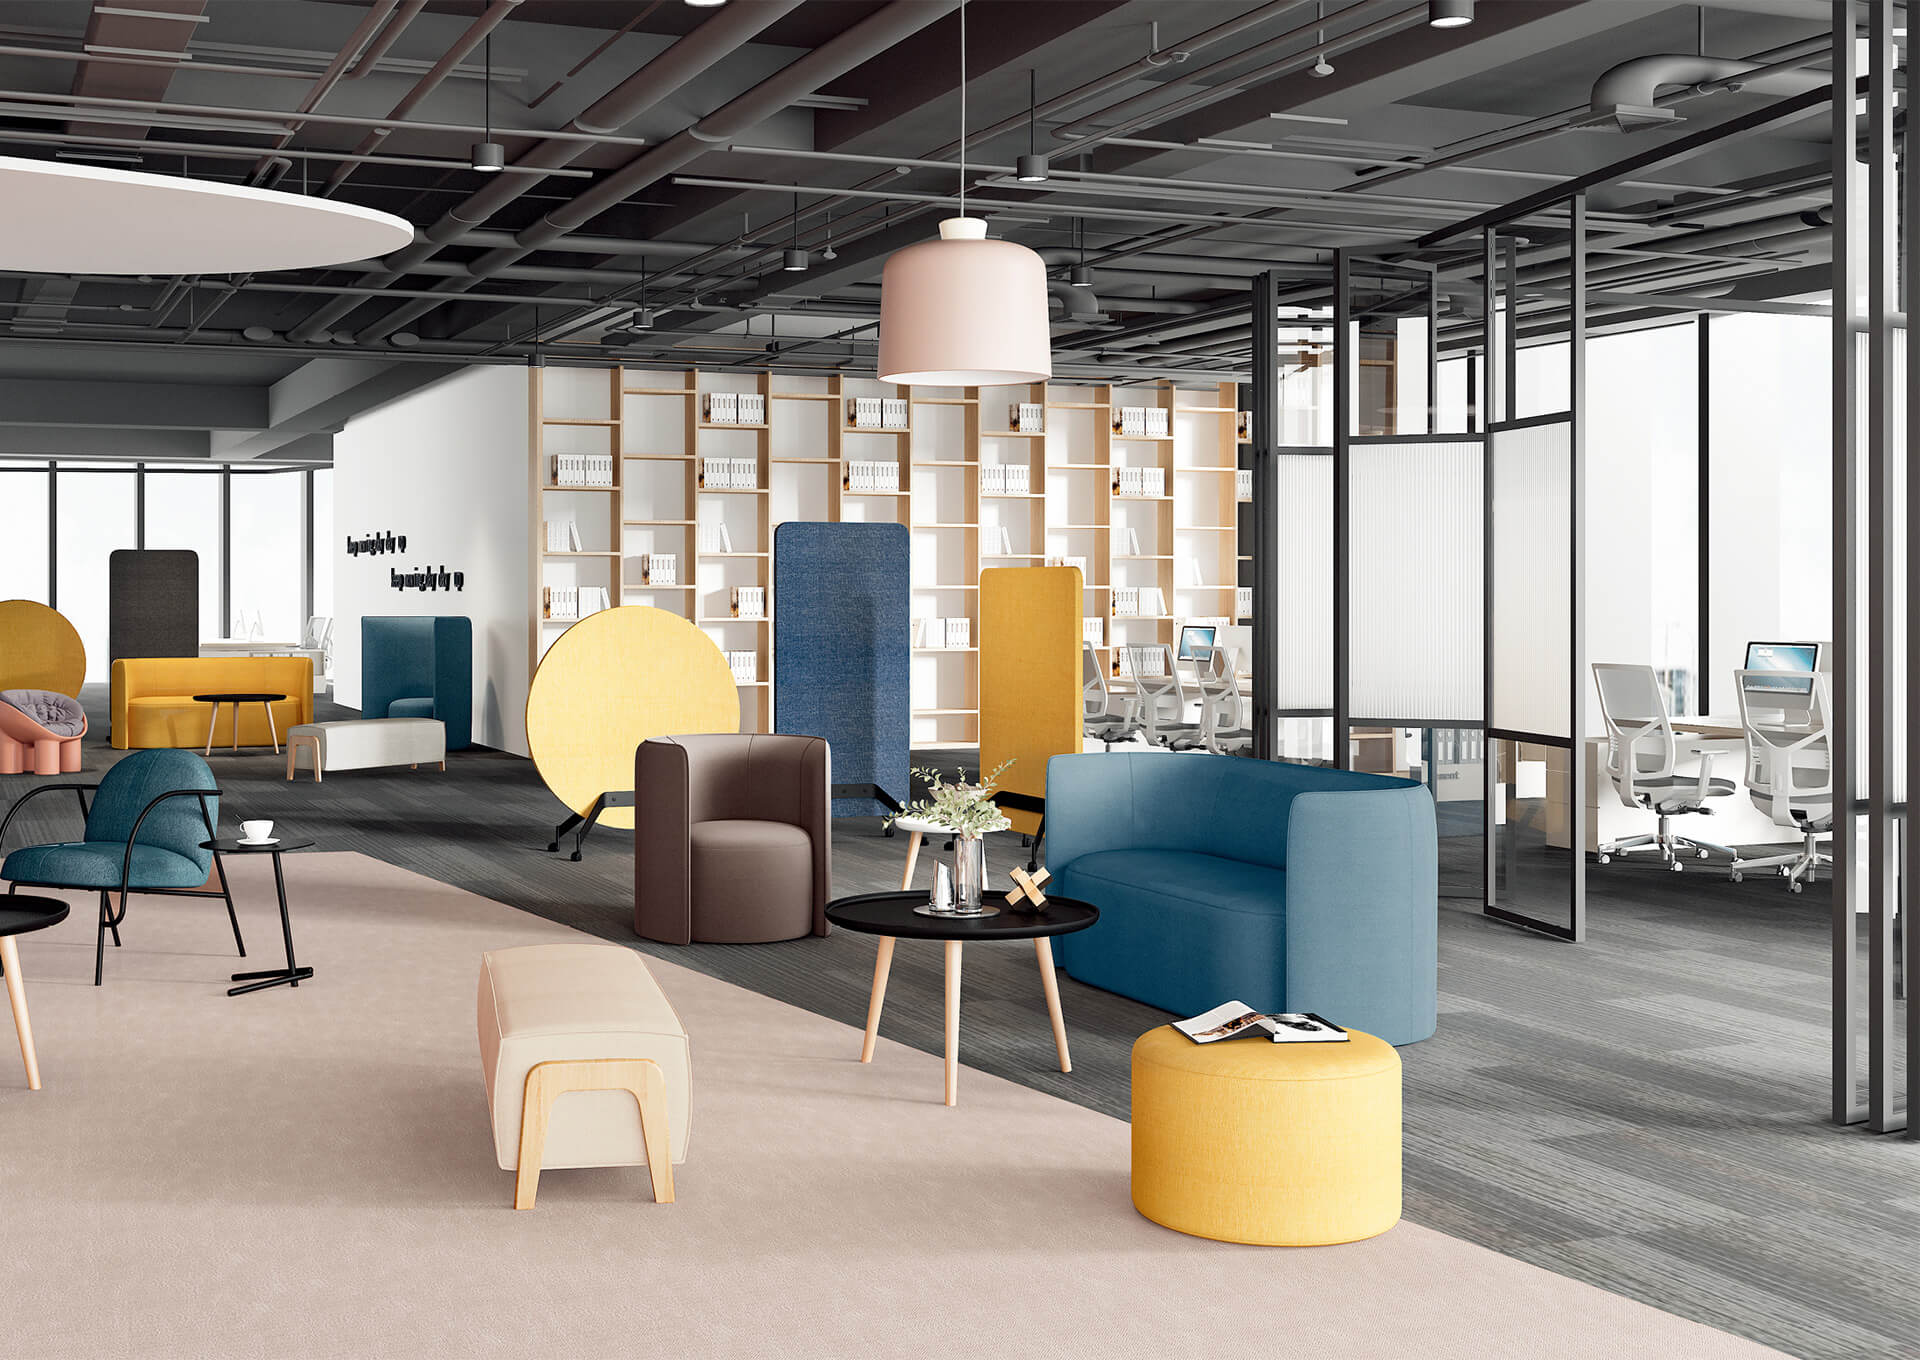 How to choose the right office furniture set